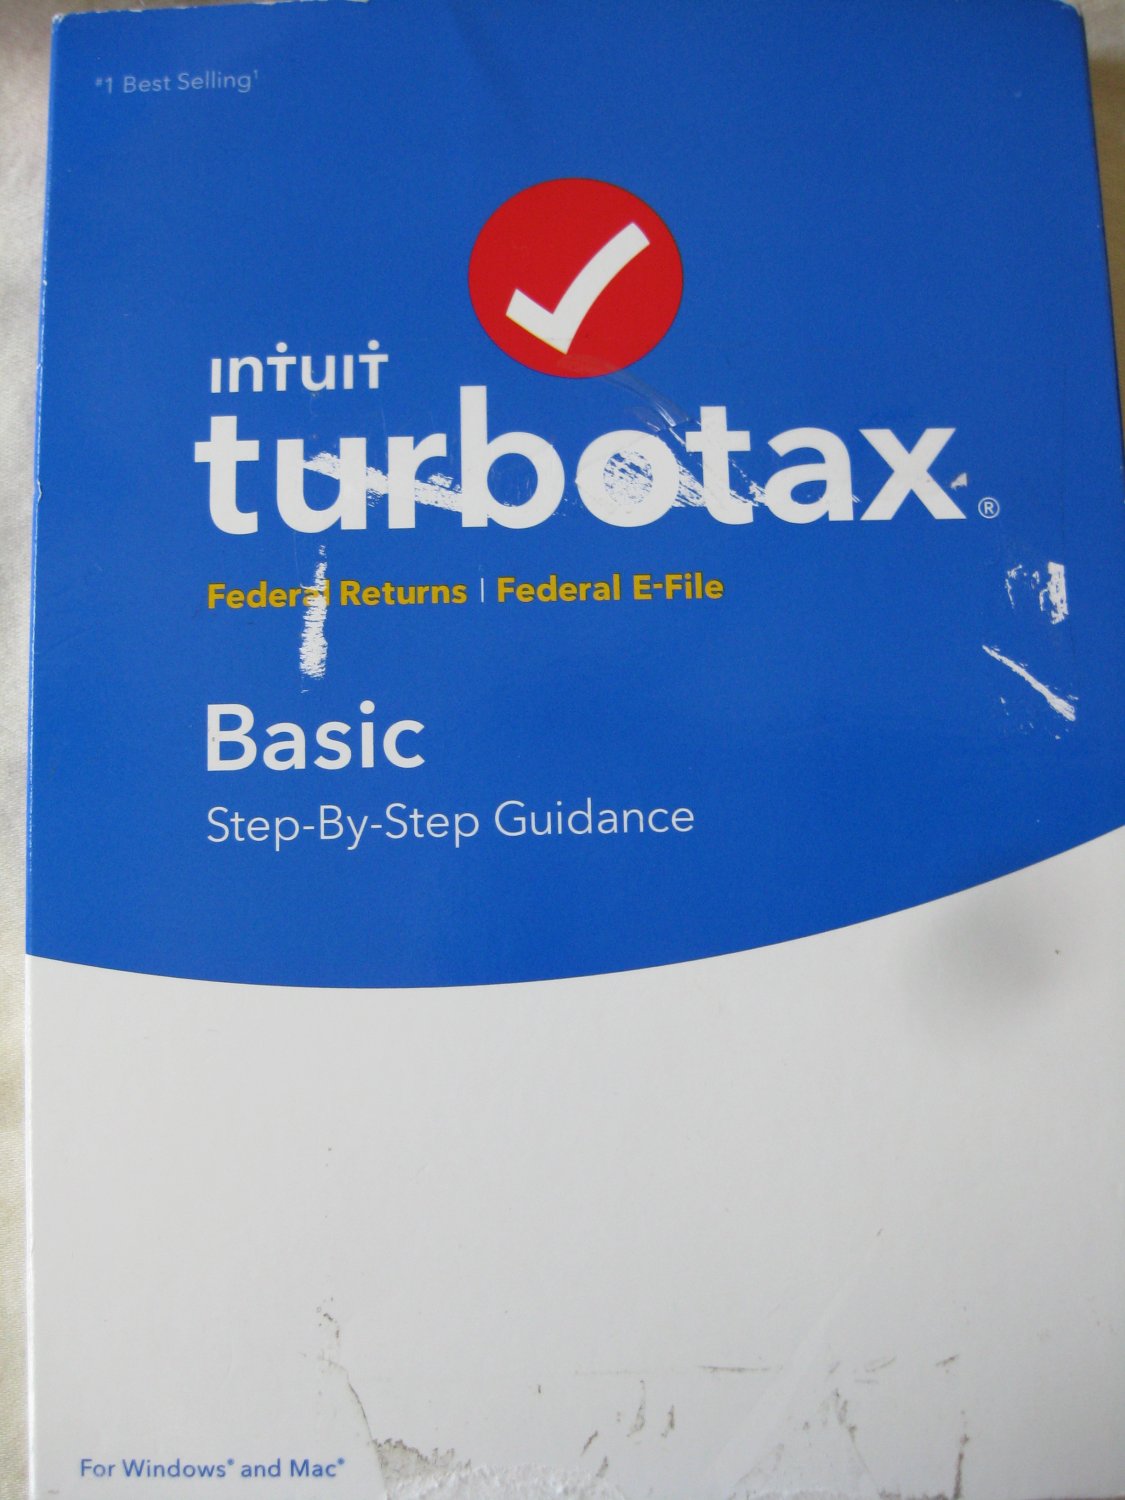 turbotax products 2016